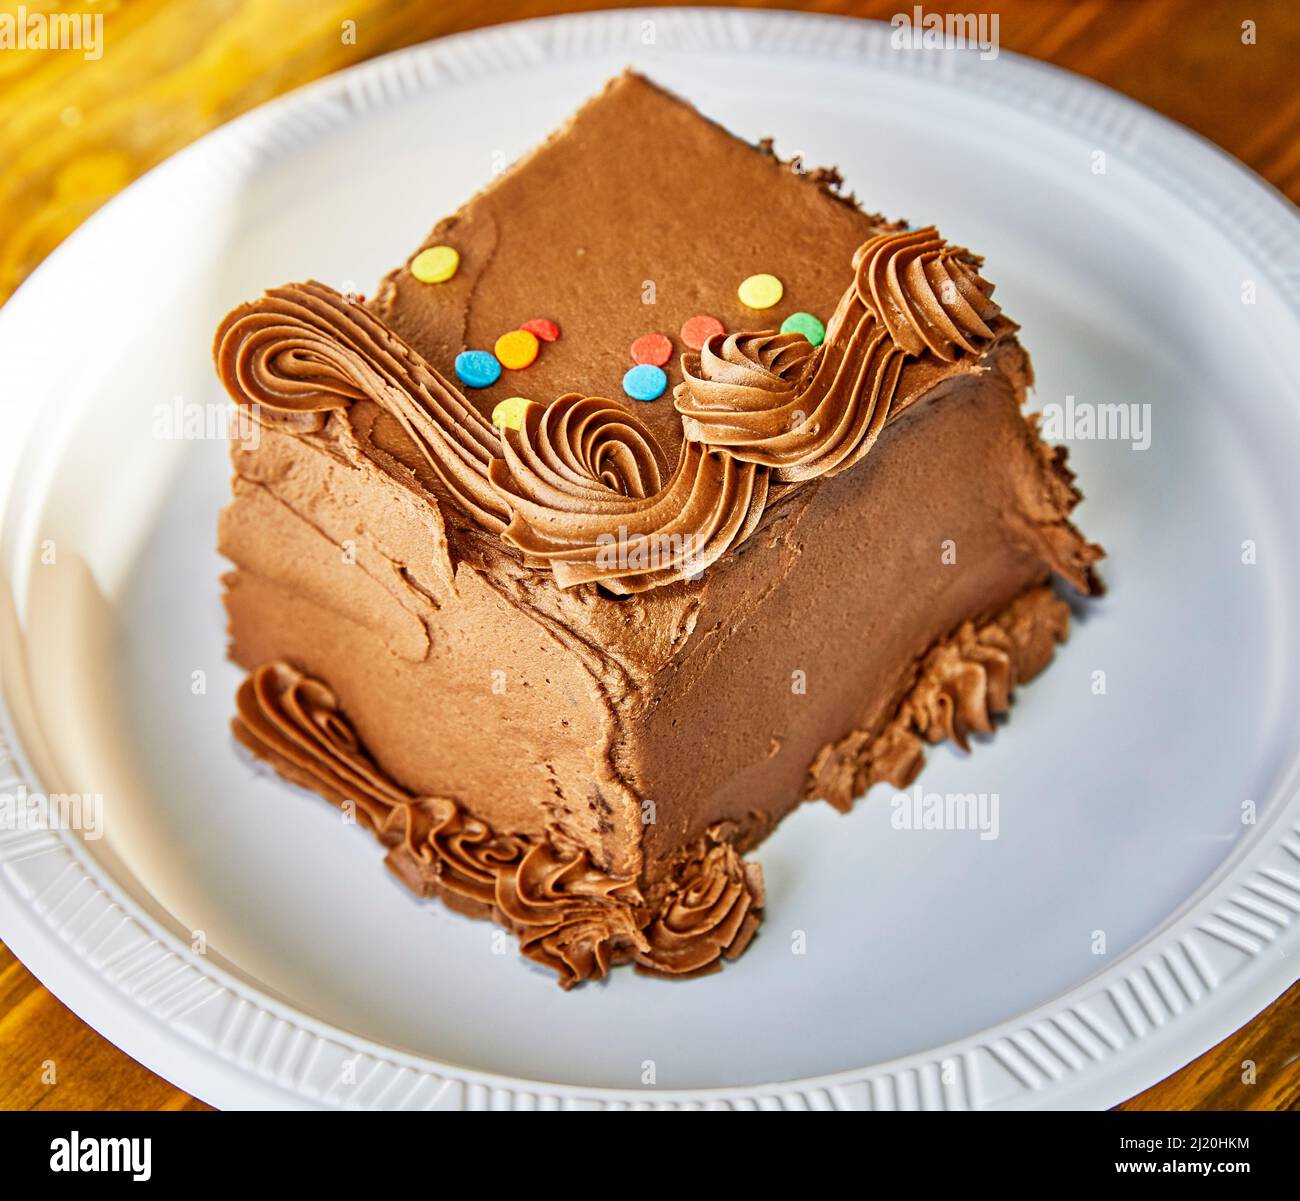 Piece of Chocolate cake with decorations on a paper plate with shallow depth of field Stock Photo